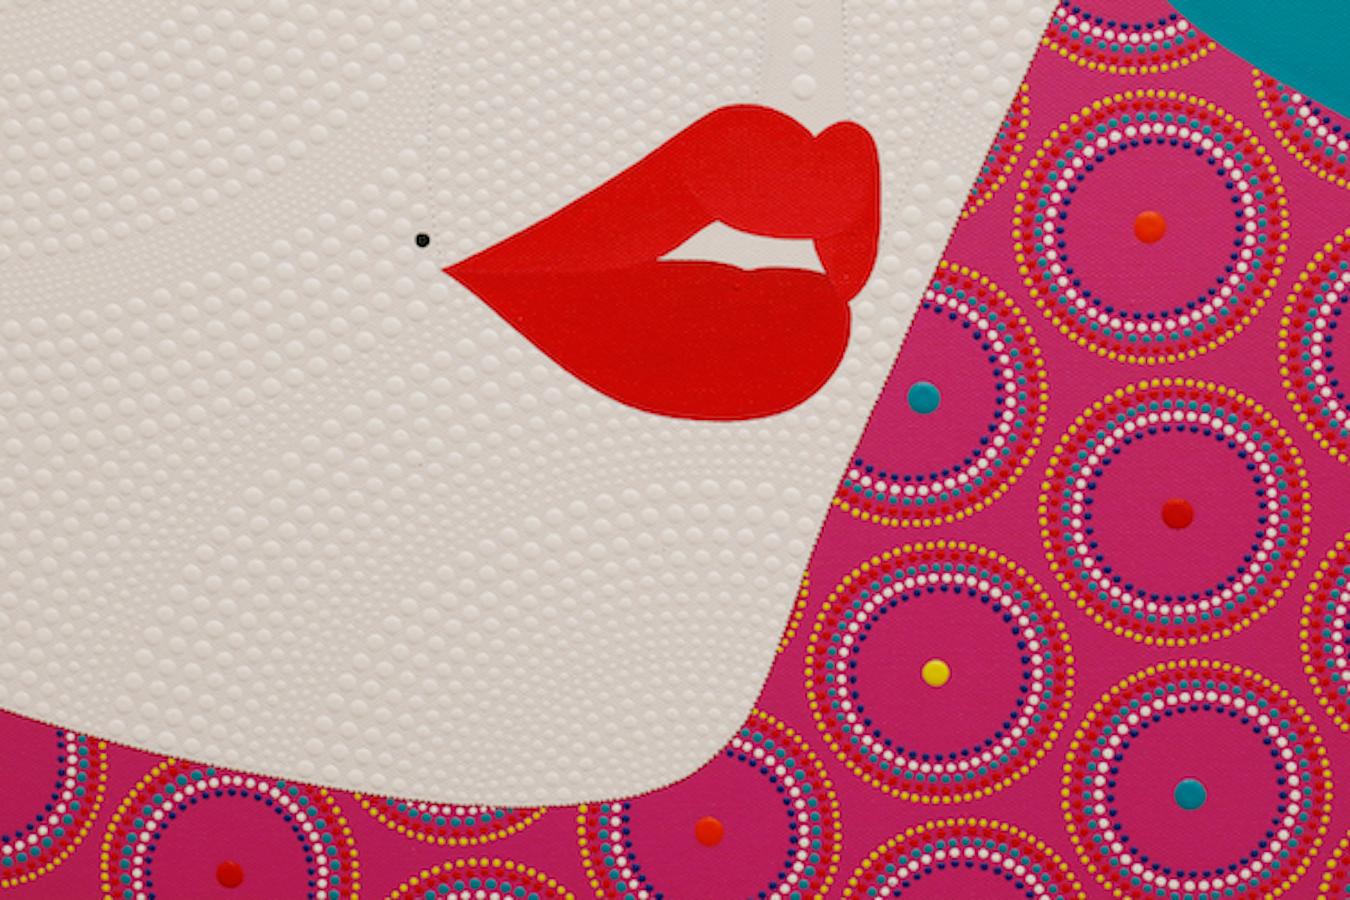 Textural free hand dot painting of woman portrait in pop style with red bold lips, titled “Carin